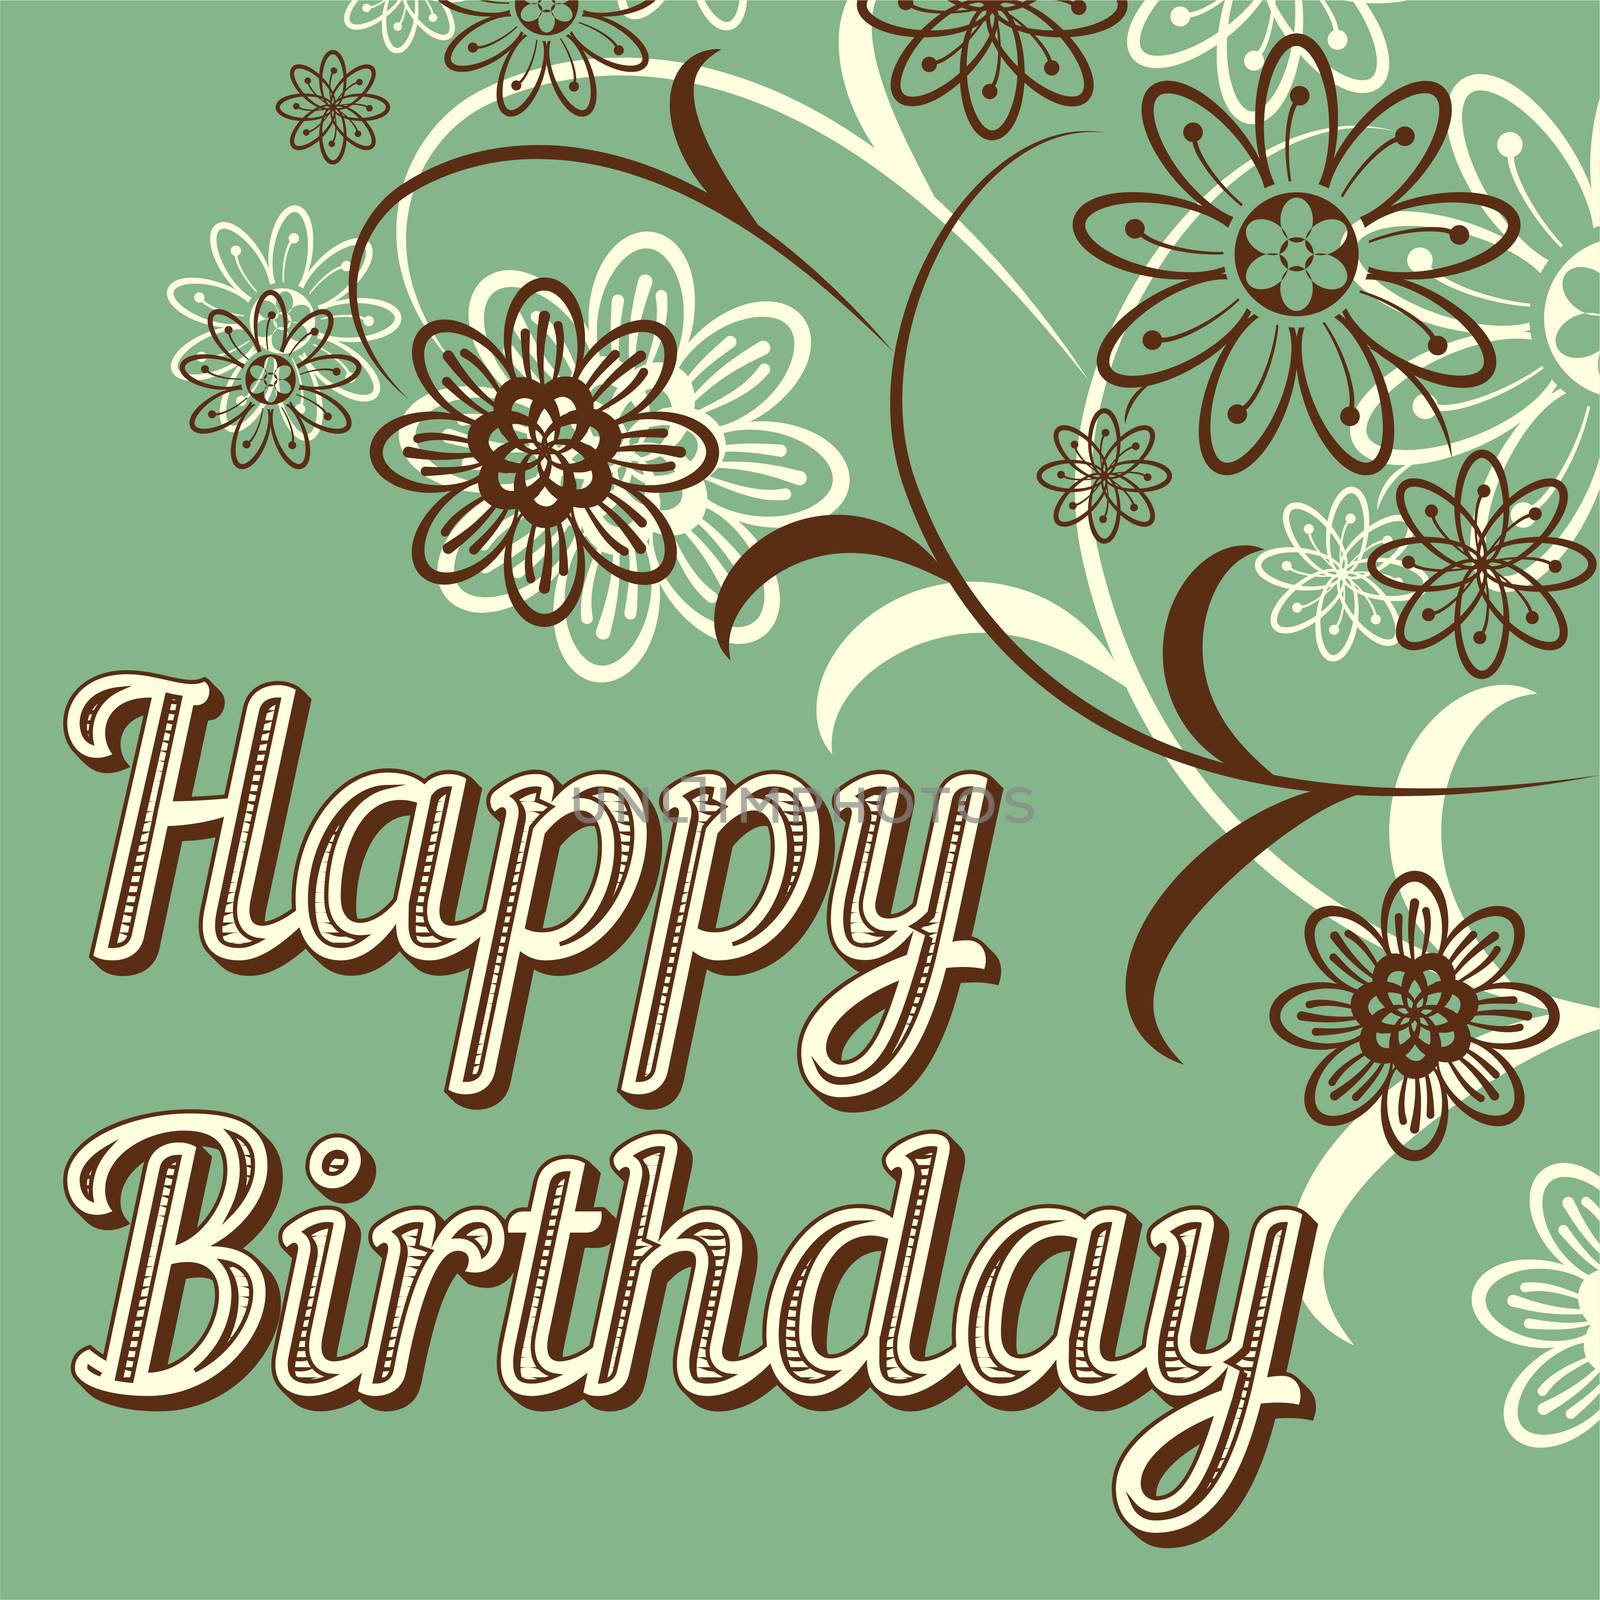 Vintage retro happy birthday card, with fonts, grunge frame and chevrons. Beautiful flowers. by Adamchuk